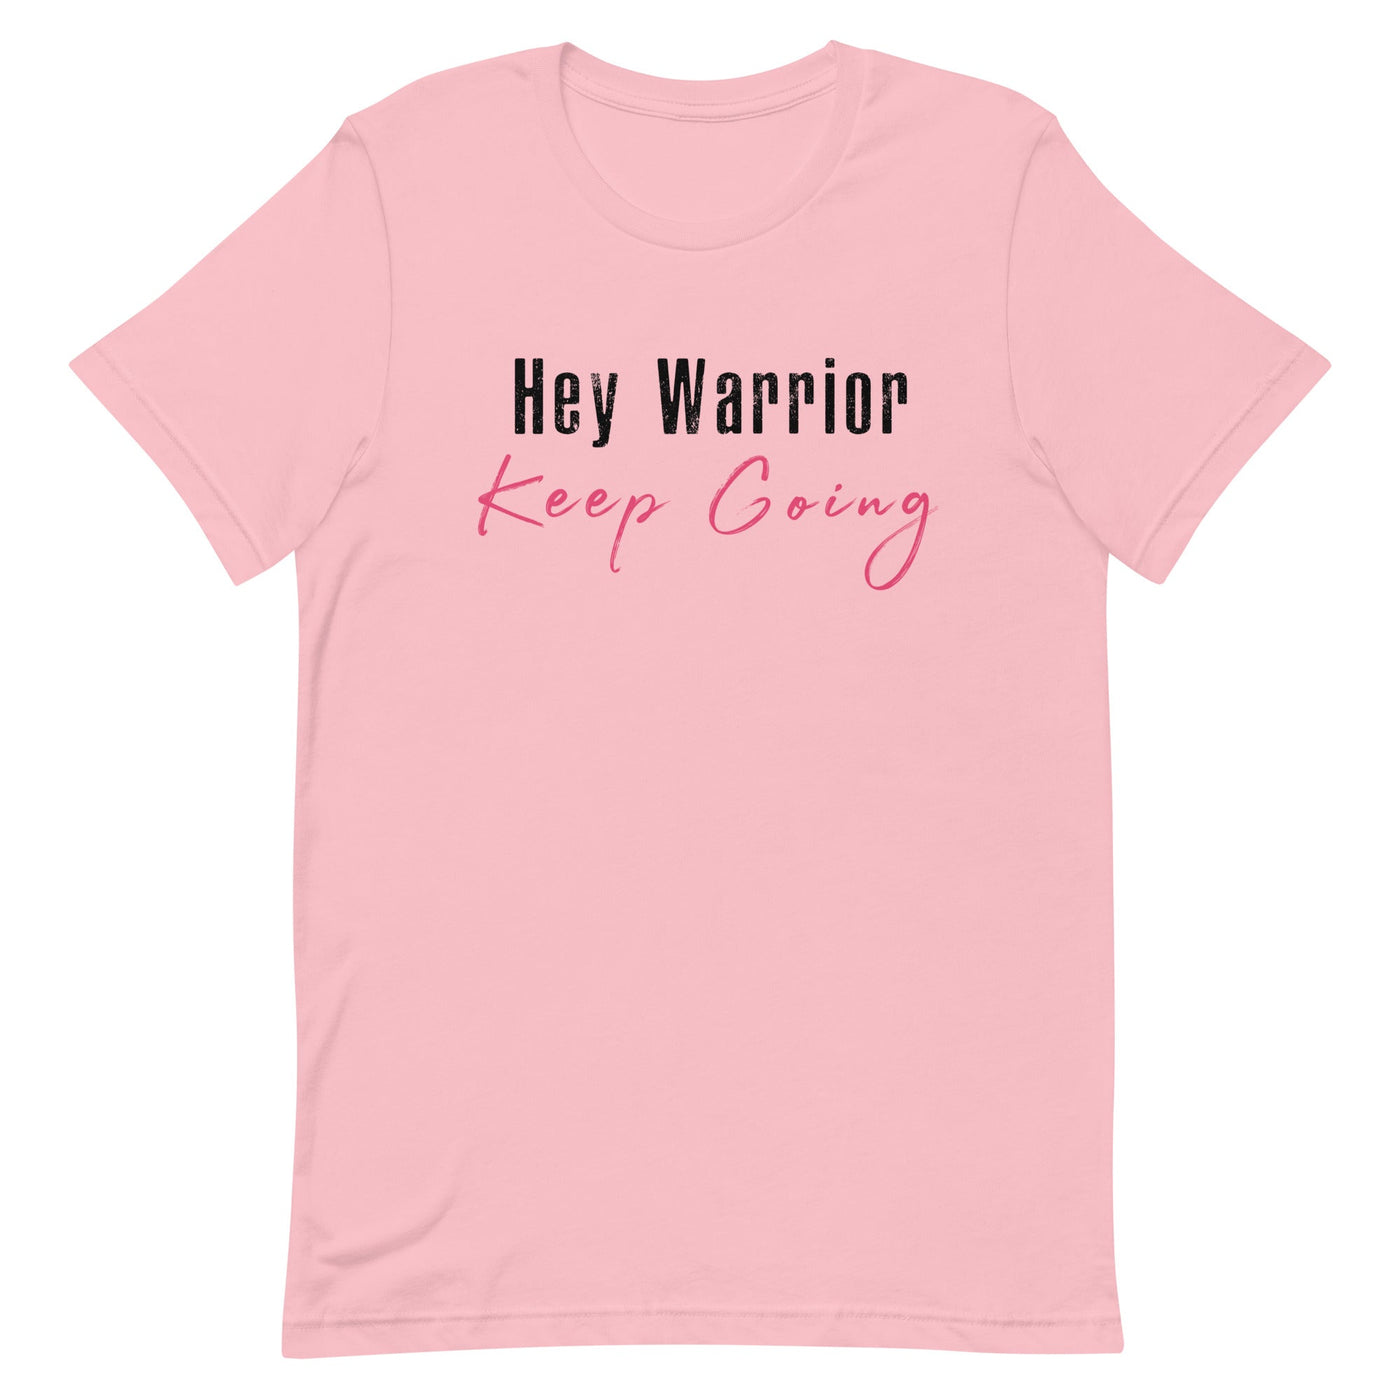 HEY WARRIOR KEEP GOING WOMEN'S T-SHIRT- BLACK AND PINK FONT Pink S 